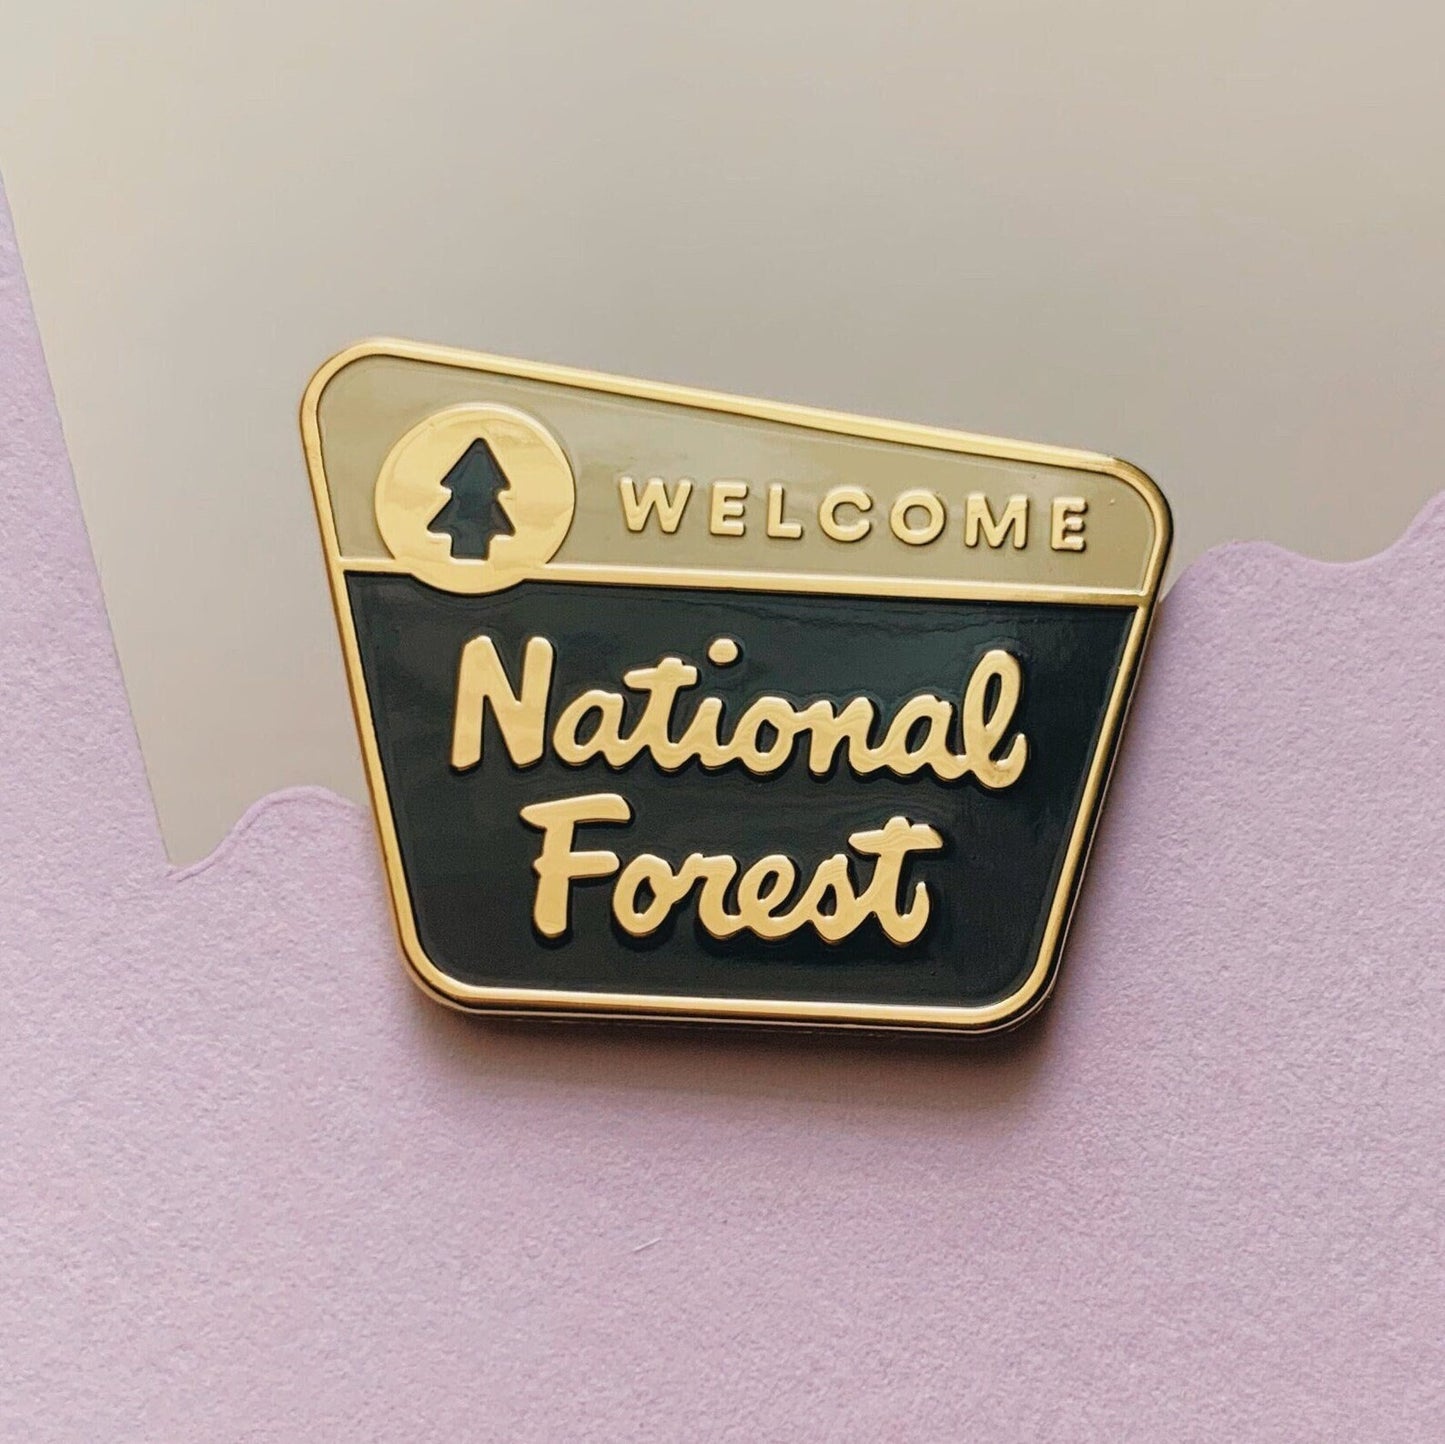 National Forest Enamel Pin